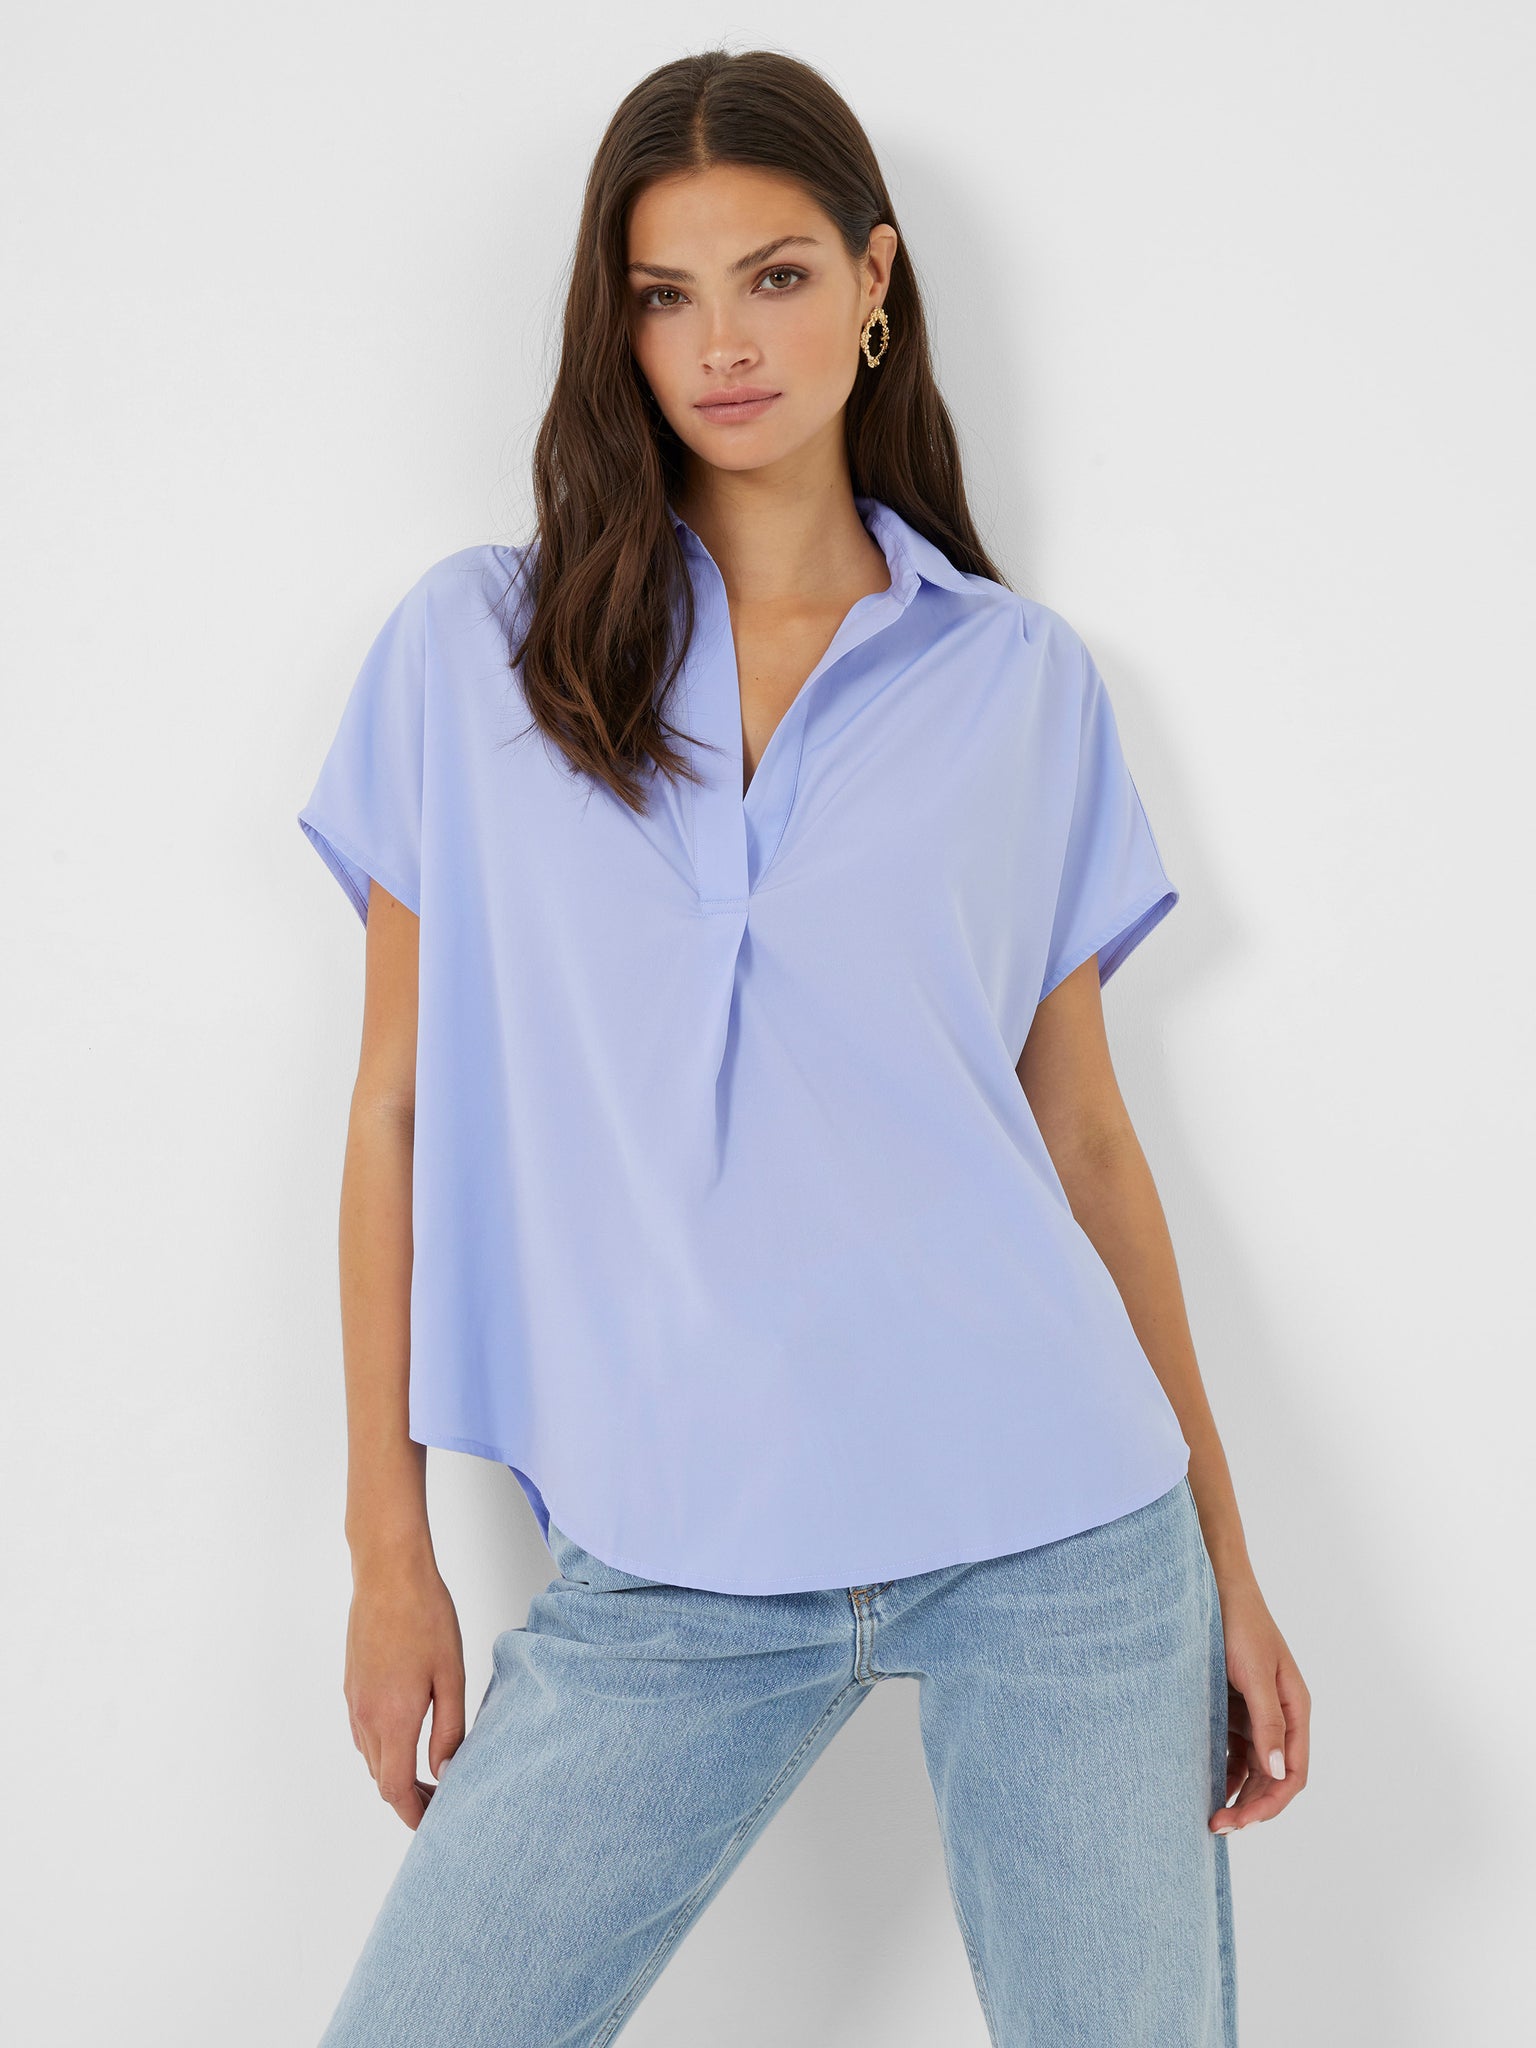 French Connection Crepe Light Recycled Popover Shirt in Blue